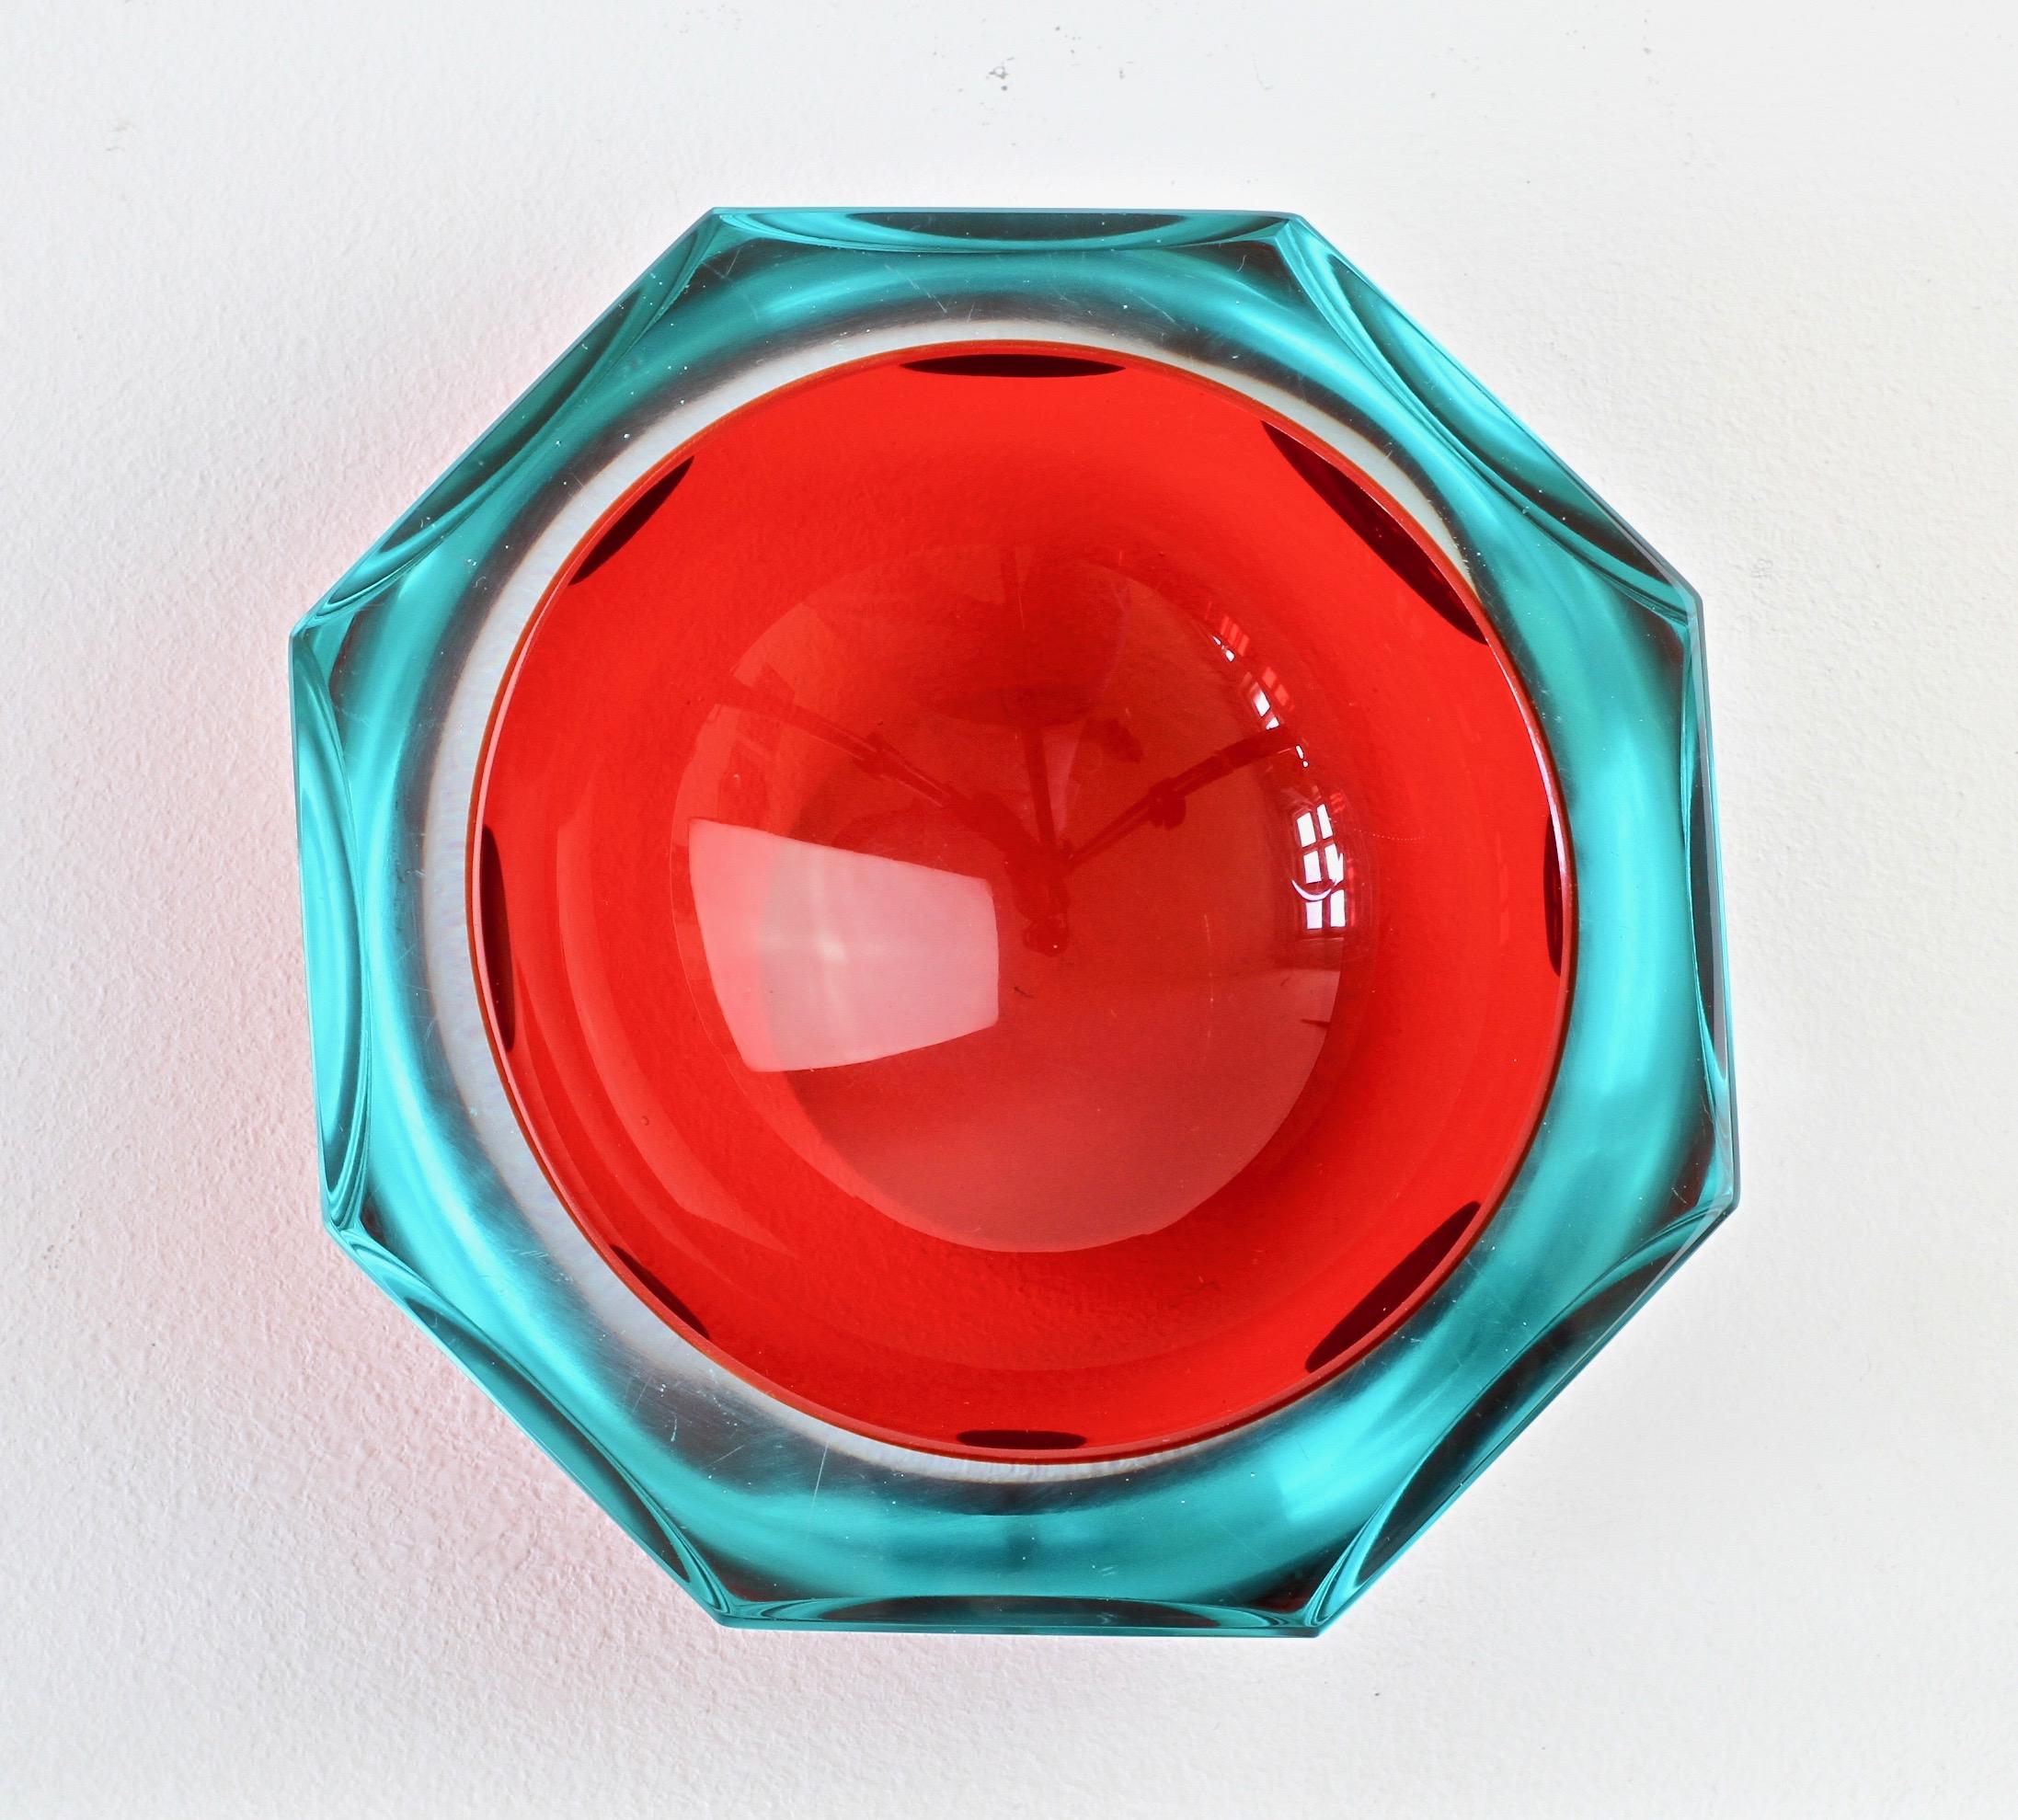 Large vintage Italian midcentury Murano faceted art glass bowl attributed to Mandruzzato, circa 1970s. The combination of ruby red and blue tinted or clear 'Sommerso' cut-glass looks simply stunning.

The early work of Mandruzzato is quite hard to